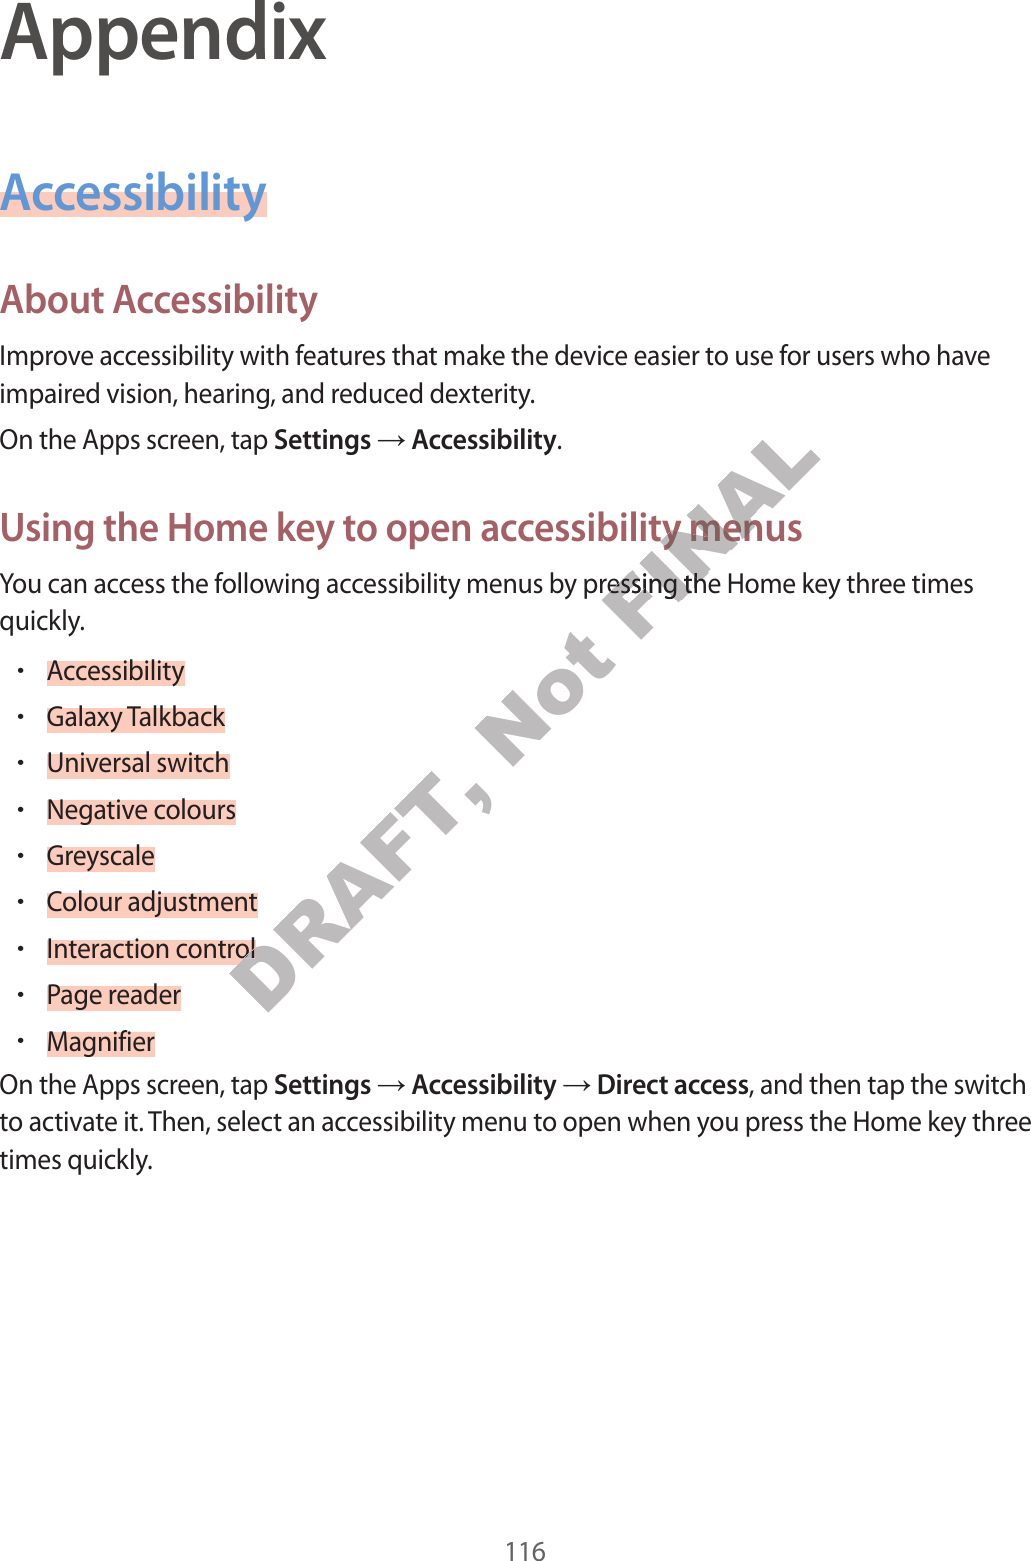 116AppendixAccessibilityAbout A c c essibilityImprove ac c essibility with featur es tha t make the device easier t o use f or users who ha v e impaired vision, hearing , and r educed de xterity.On the Apps screen, tap Settings  Accessibility.Using the Home k ey t o open ac c essibility menusYou can access the follo wing acc essibility menus by pr essing the Home key thr ee times quickly.•Accessibility•Galaxy T alkback•Universal switch•Negative c olours•Greyscale•Colour adjustment•Interaction control•P age r eader•MagnifierOn the Apps screen, tap Settings  Accessibility  Direct access, and then tap the switch to activate it. T hen, select an accessibility menu to open when you pr ess the Home key thr ee times quickly .DRAFT, DRAFT, DRAFT, Interaction controlDRAFT, Interaction controlInteraction controlNot FINALUsing the Home k ey t o open ac c essibility menusFINALUsing the Home k ey t o open ac c essibility menusYou can access the follo wing acc essibility menus by pr essing the Home key thr ee times FINALYou can access the follo wing acc essibility menus by pr essing the Home key thr ee times 